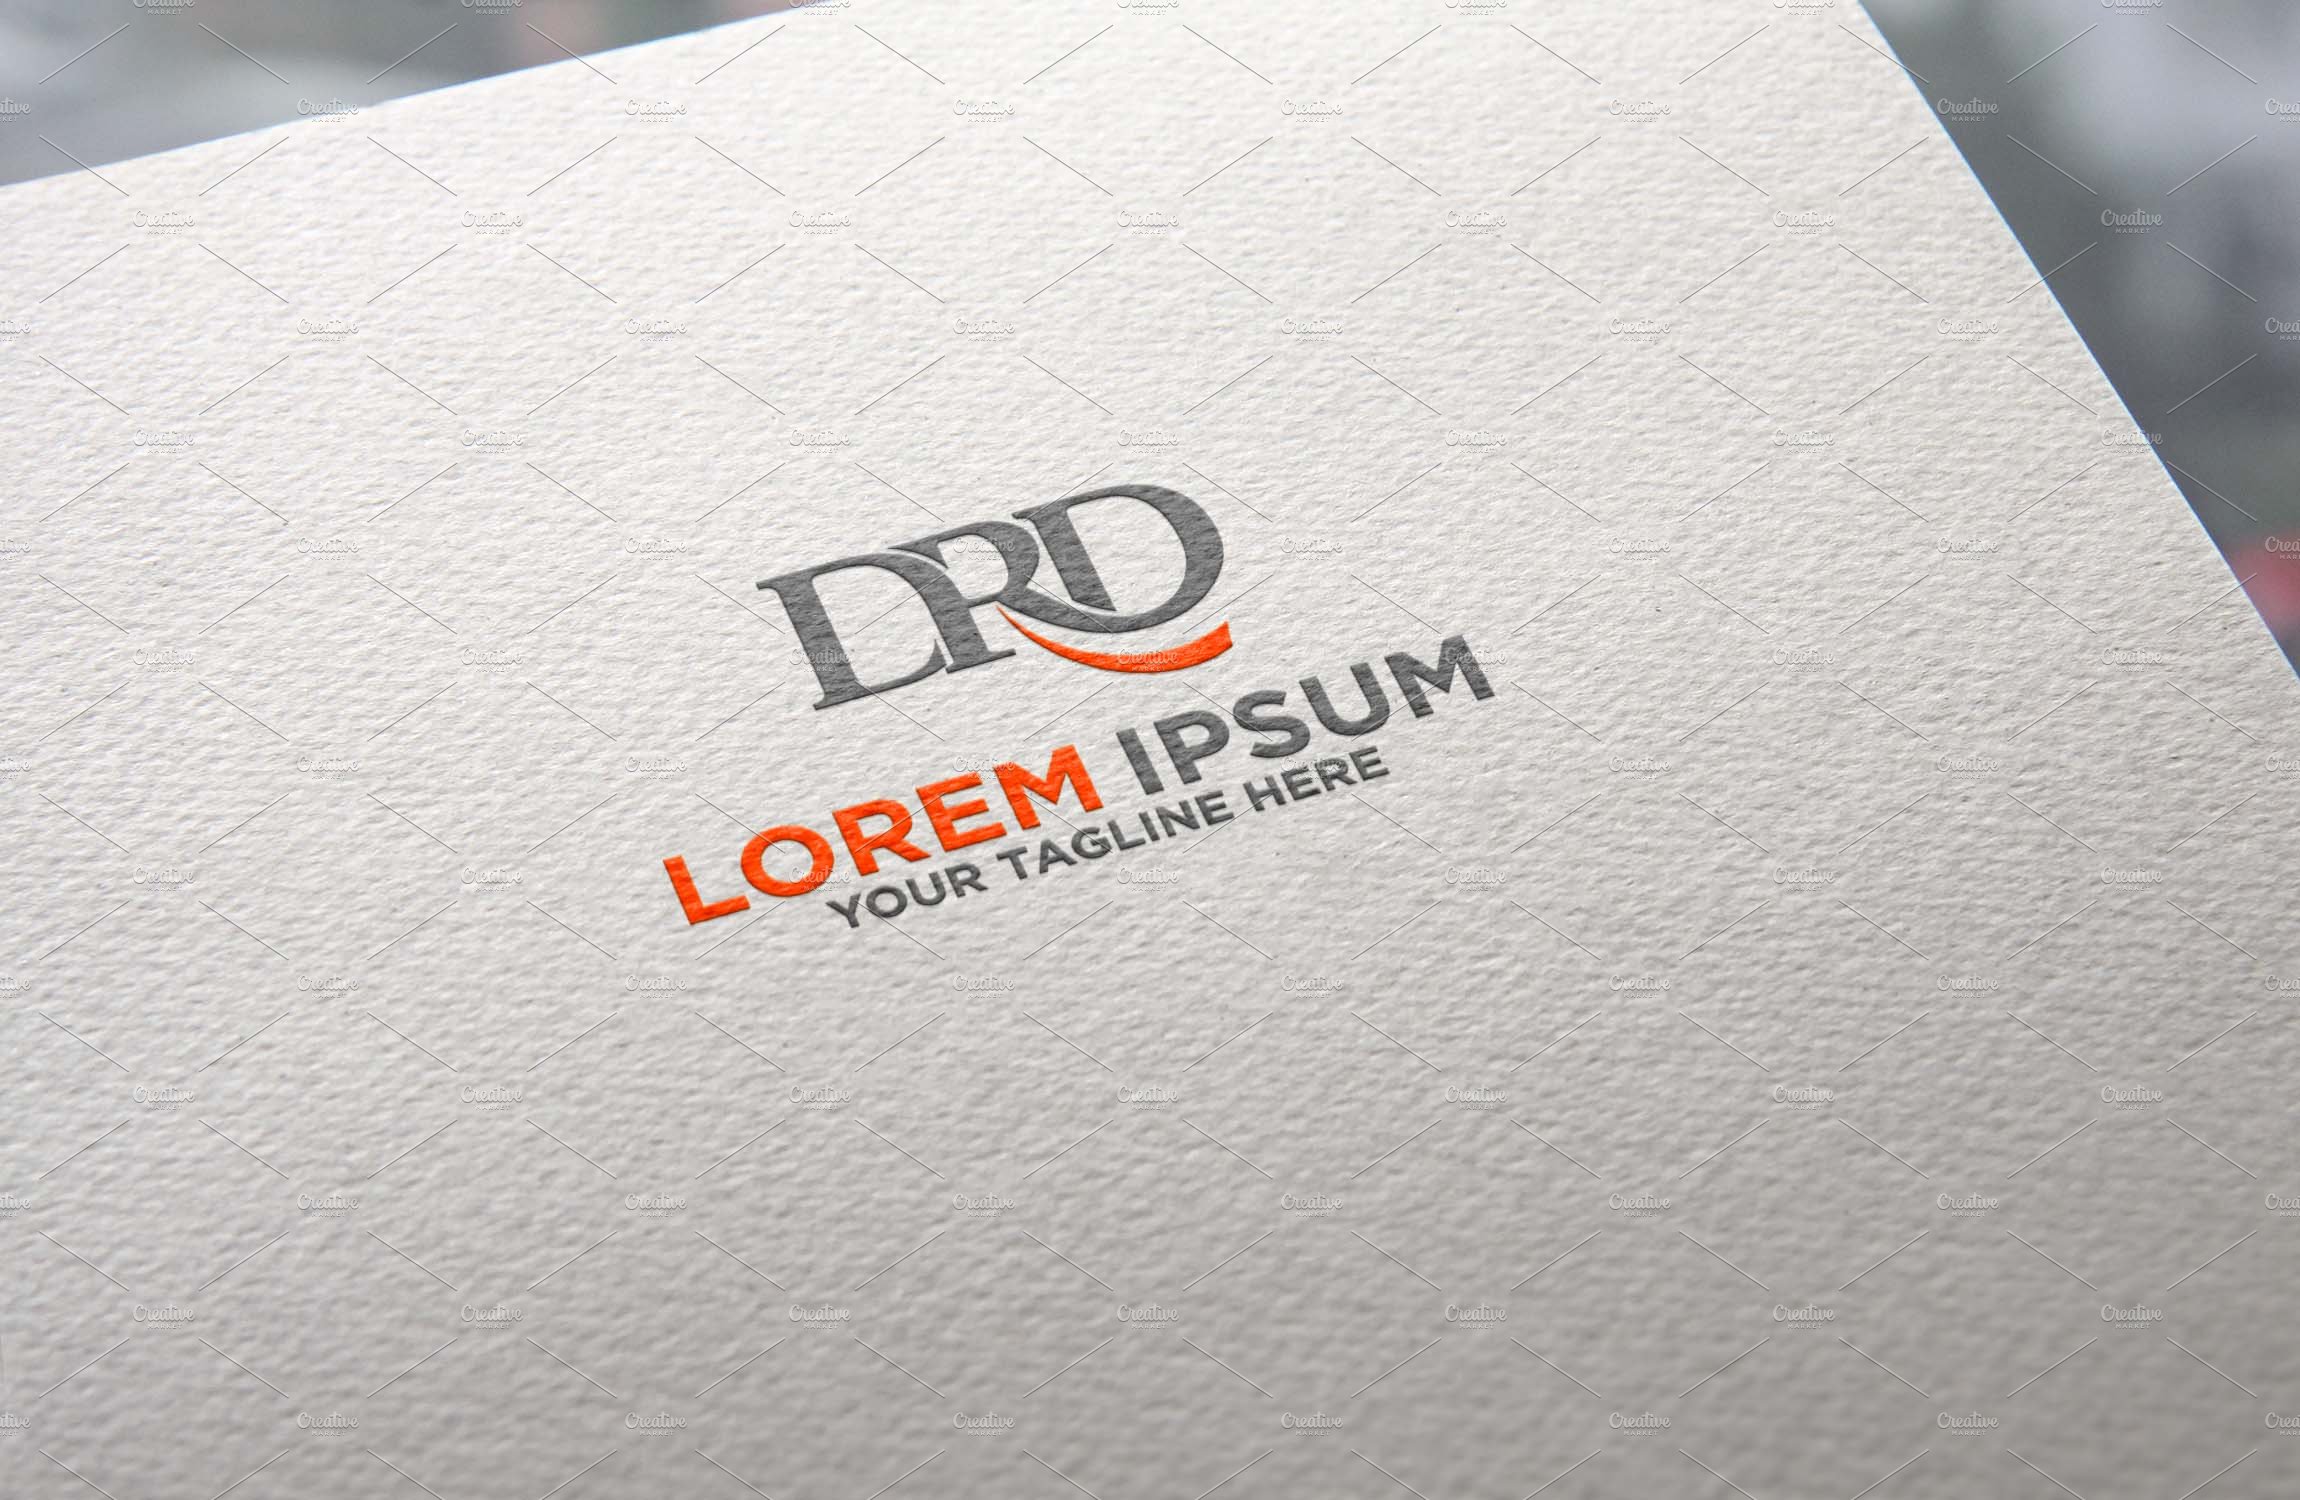 Letter DRD business logo template cover image.